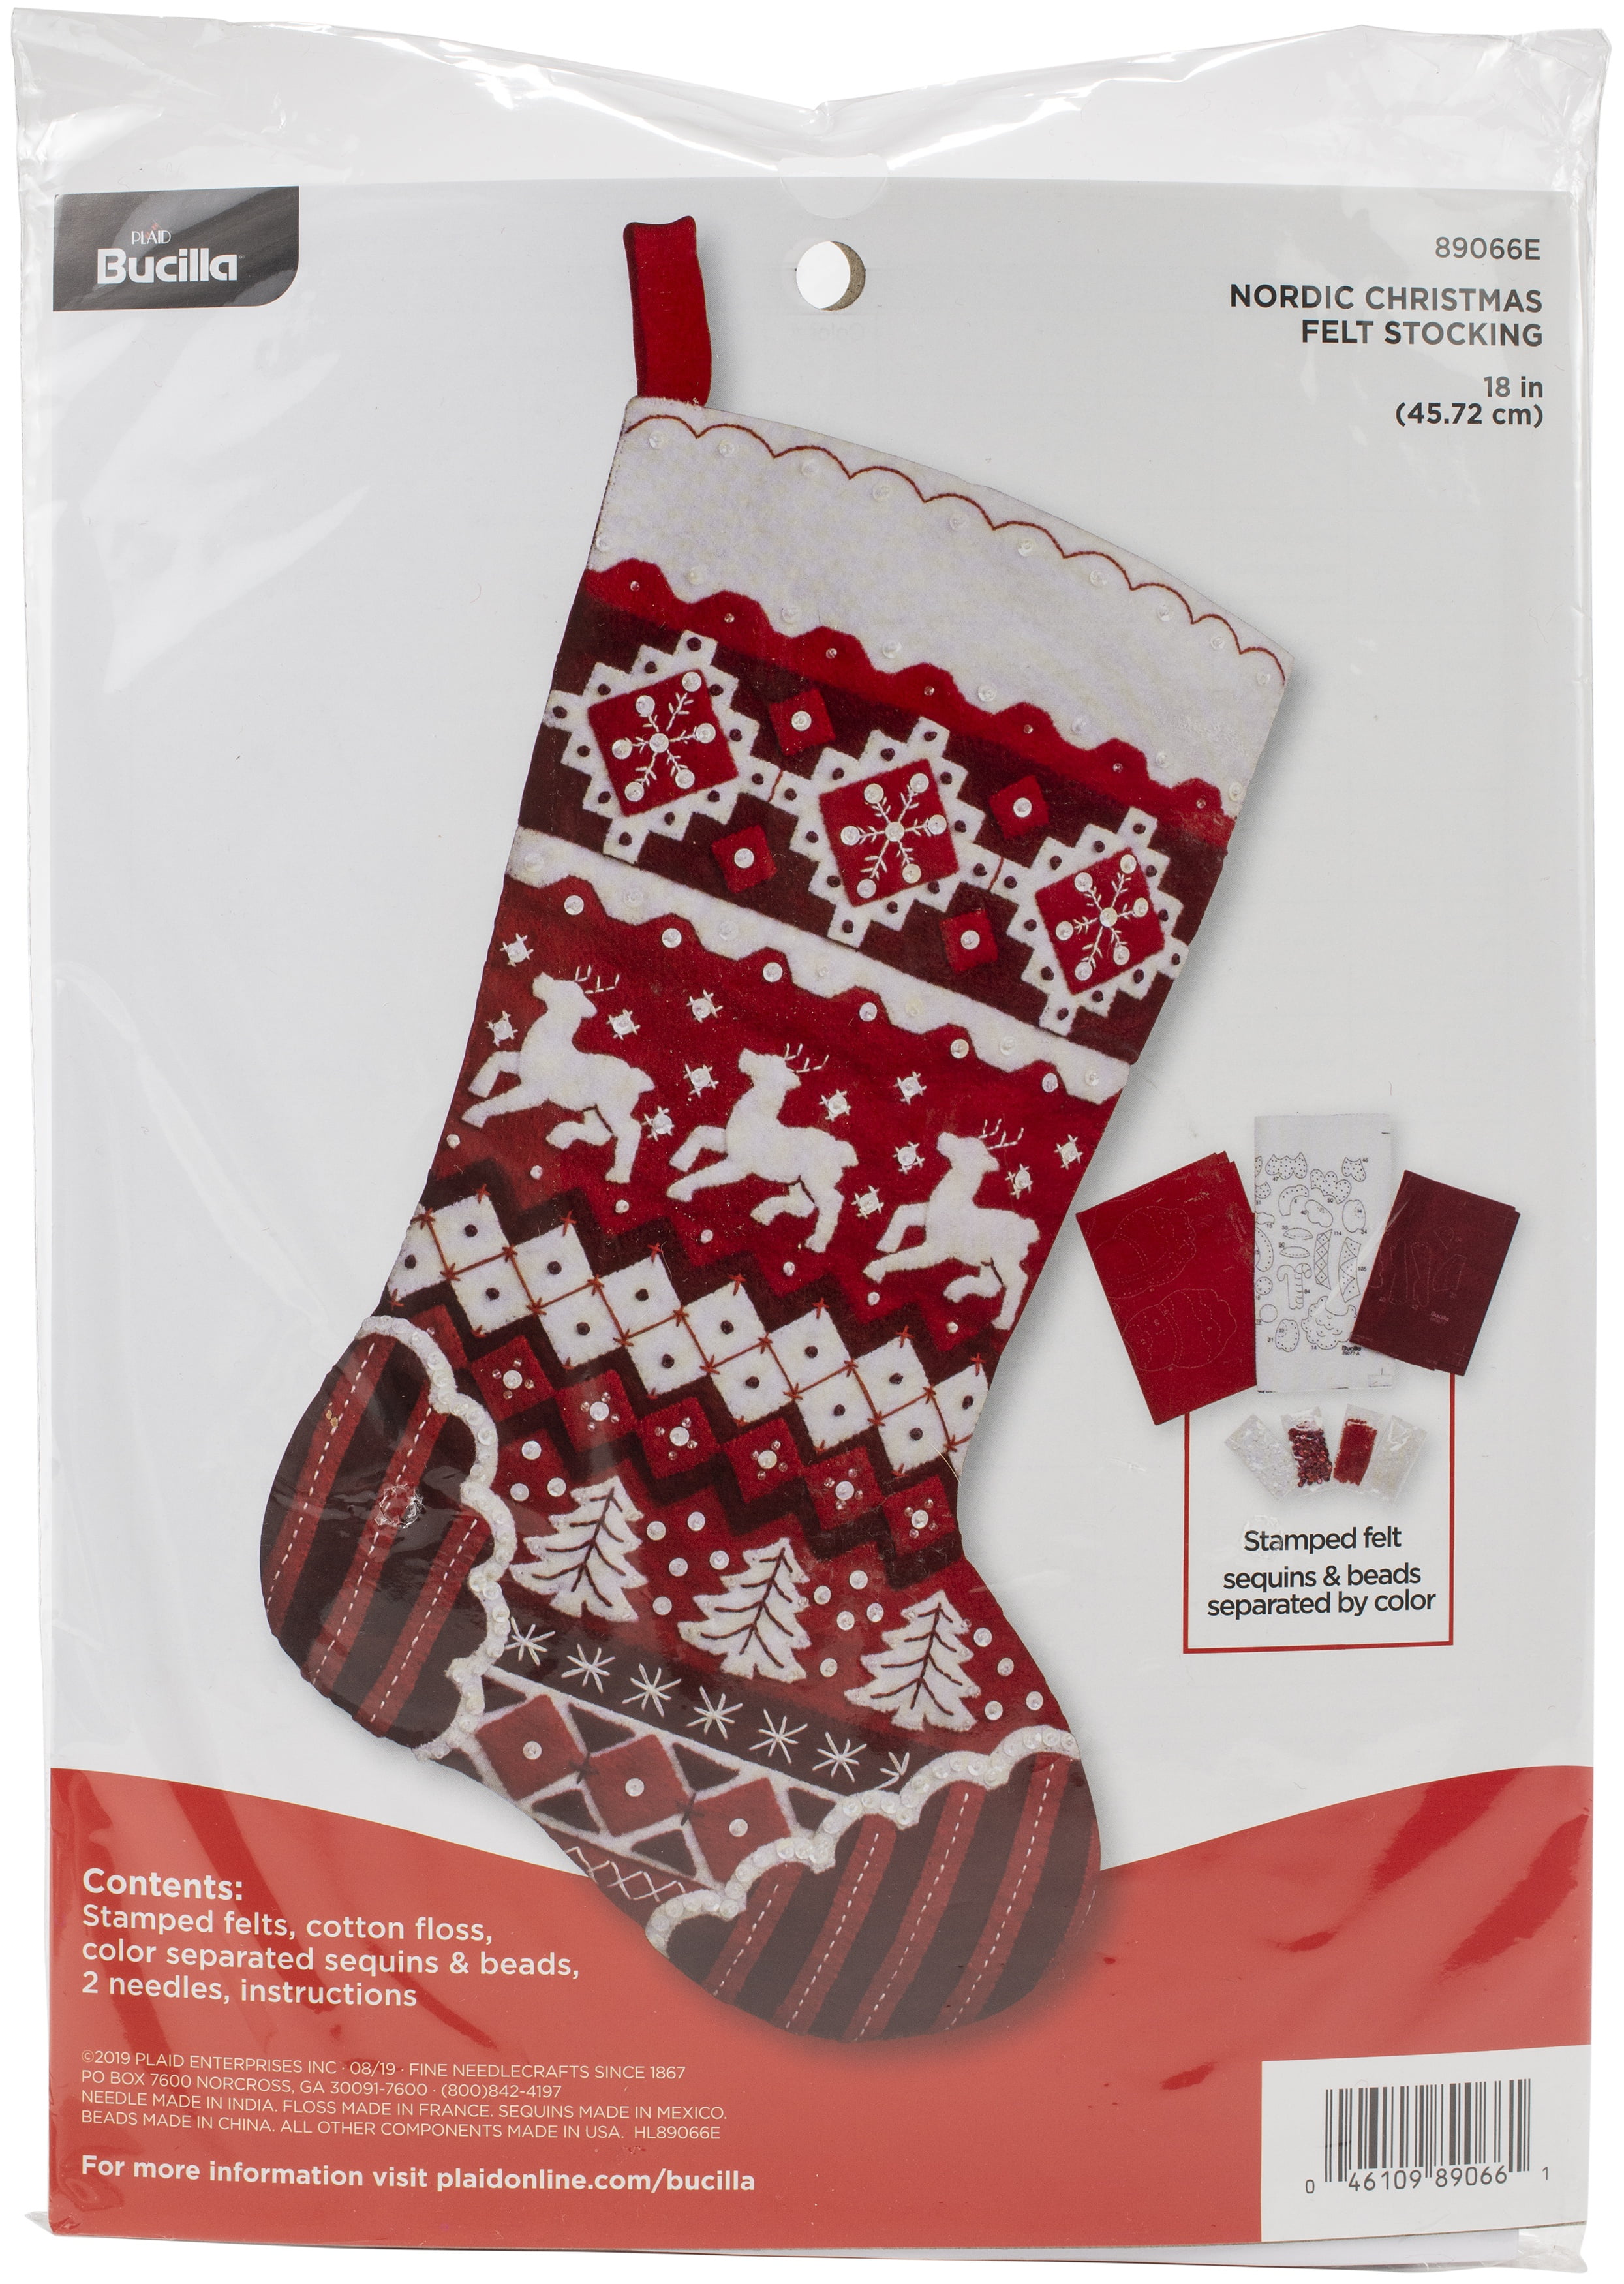 Details about   Knitted Socks Stockings Christmas Candy Cookie Snack Gift Storage Bags 